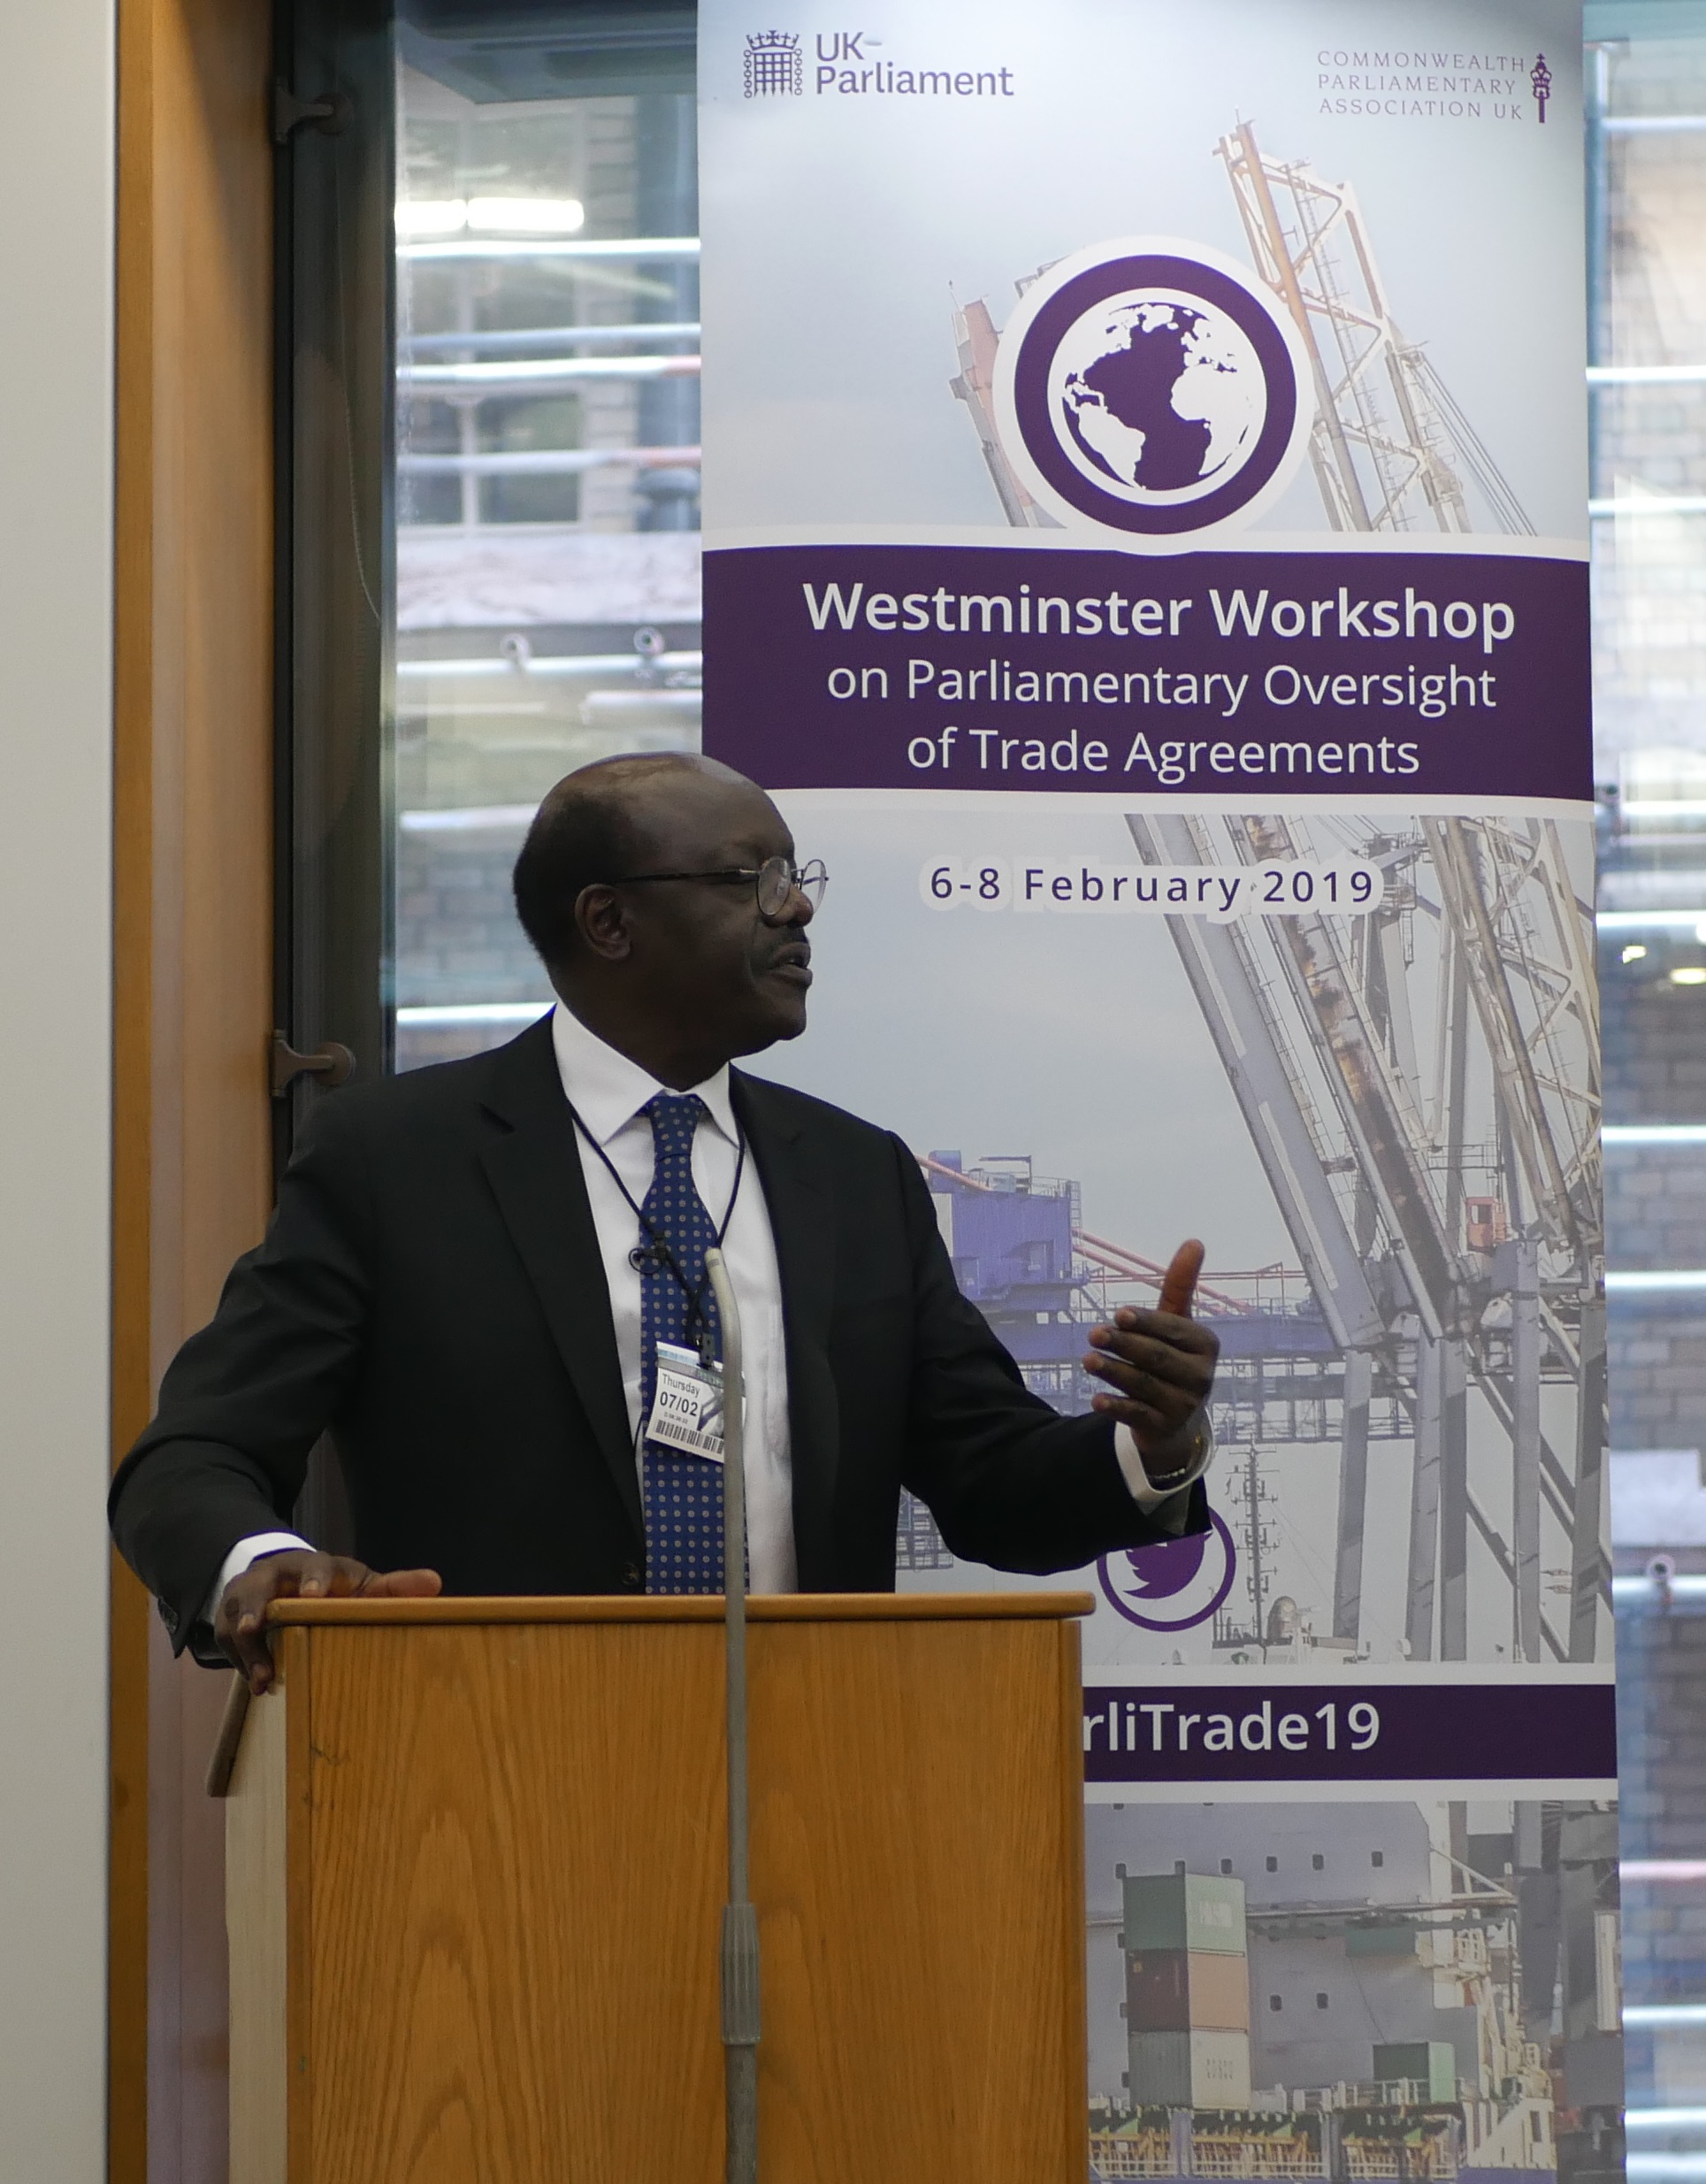 Then Secretary-General of the United Nations Conference on Trade and Development Dr Mukhisa Kituyi speaks during the Westminster Workshop on Parliamentary Oversight of Trade Agreements in February 2019